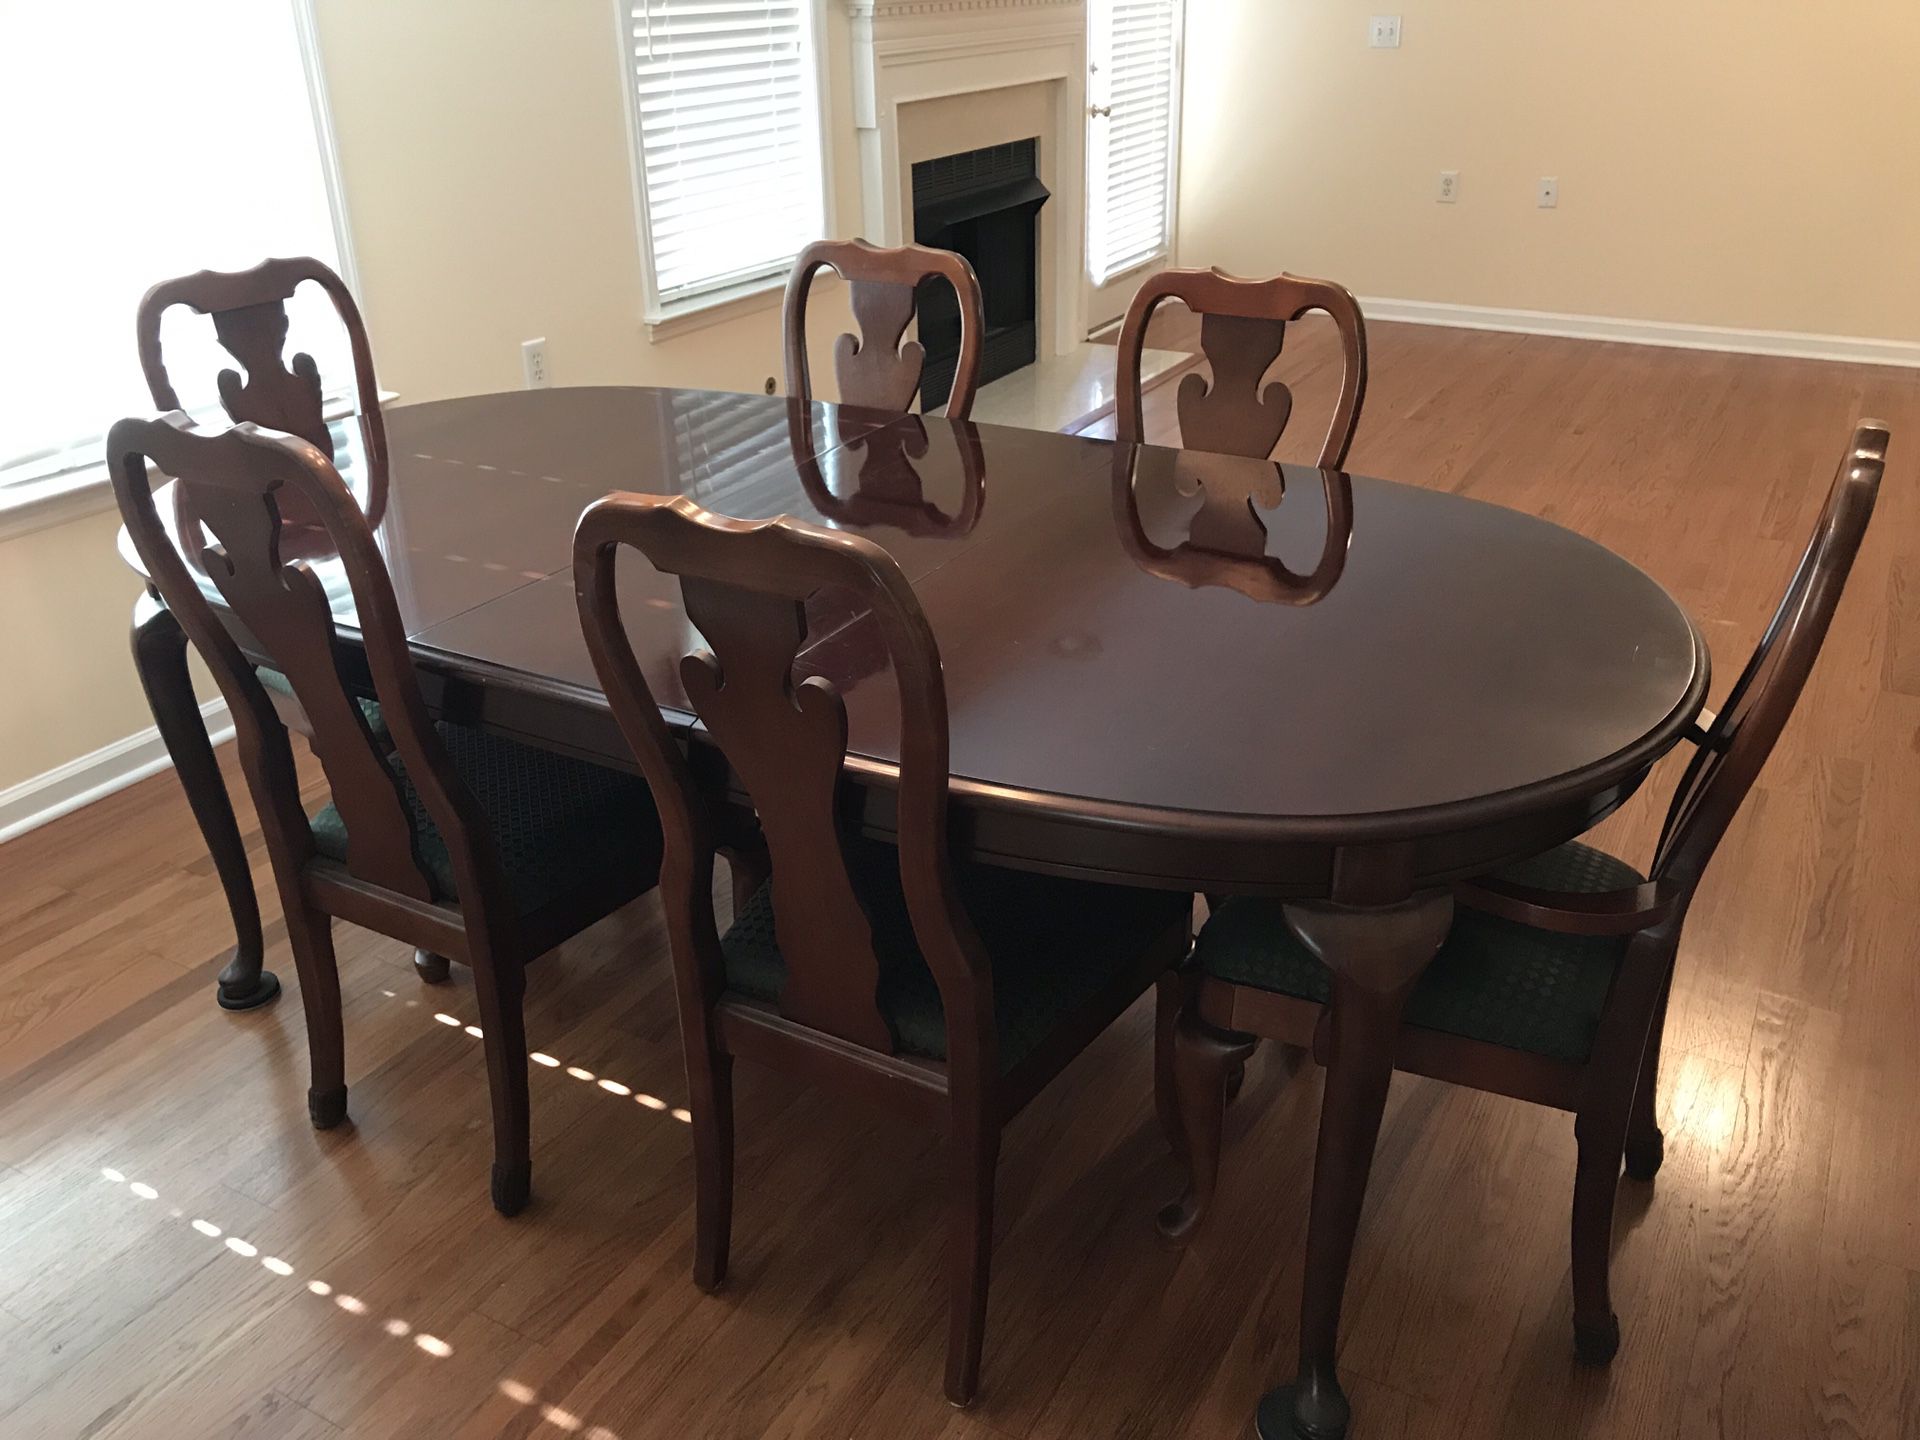 Thomasville Dining Room Suite with 2 leaves and a custom made table pad. Price $450.00